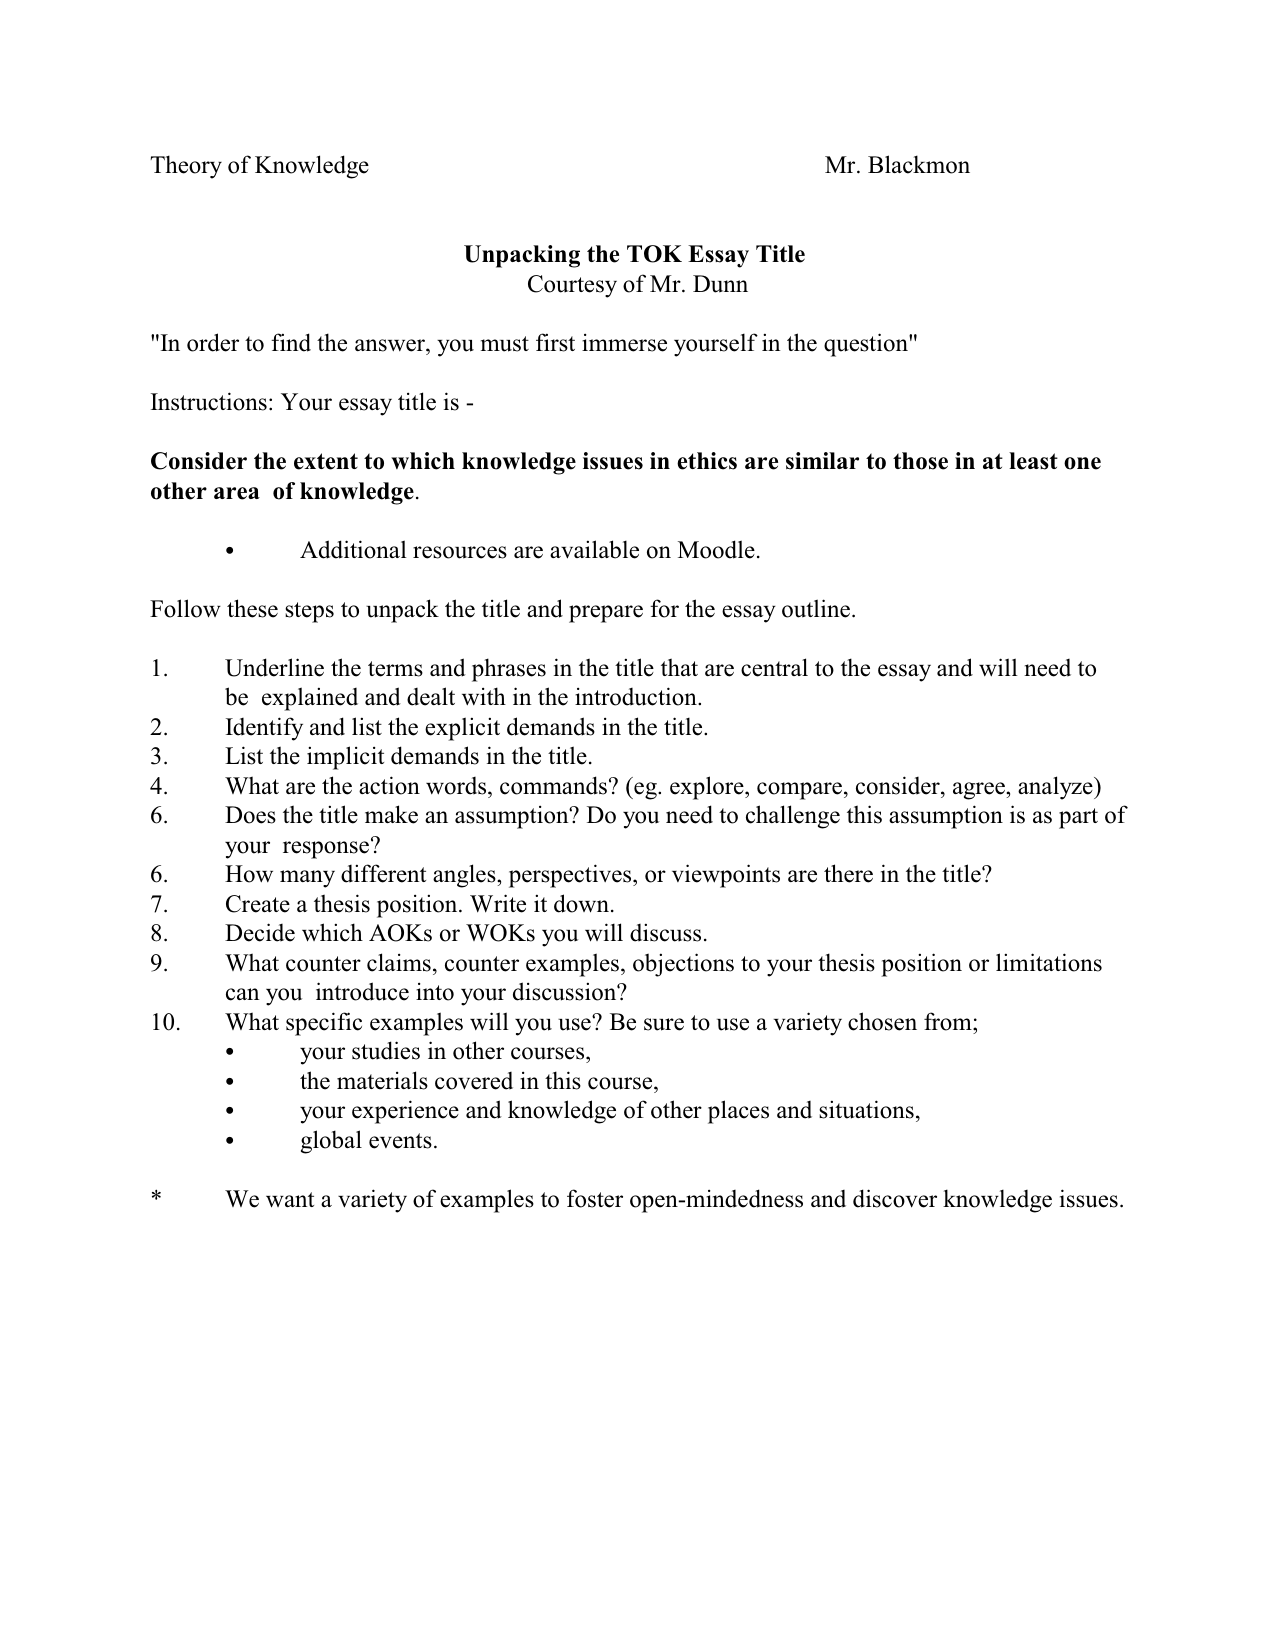 Unpacking the TOK Essay Title 26